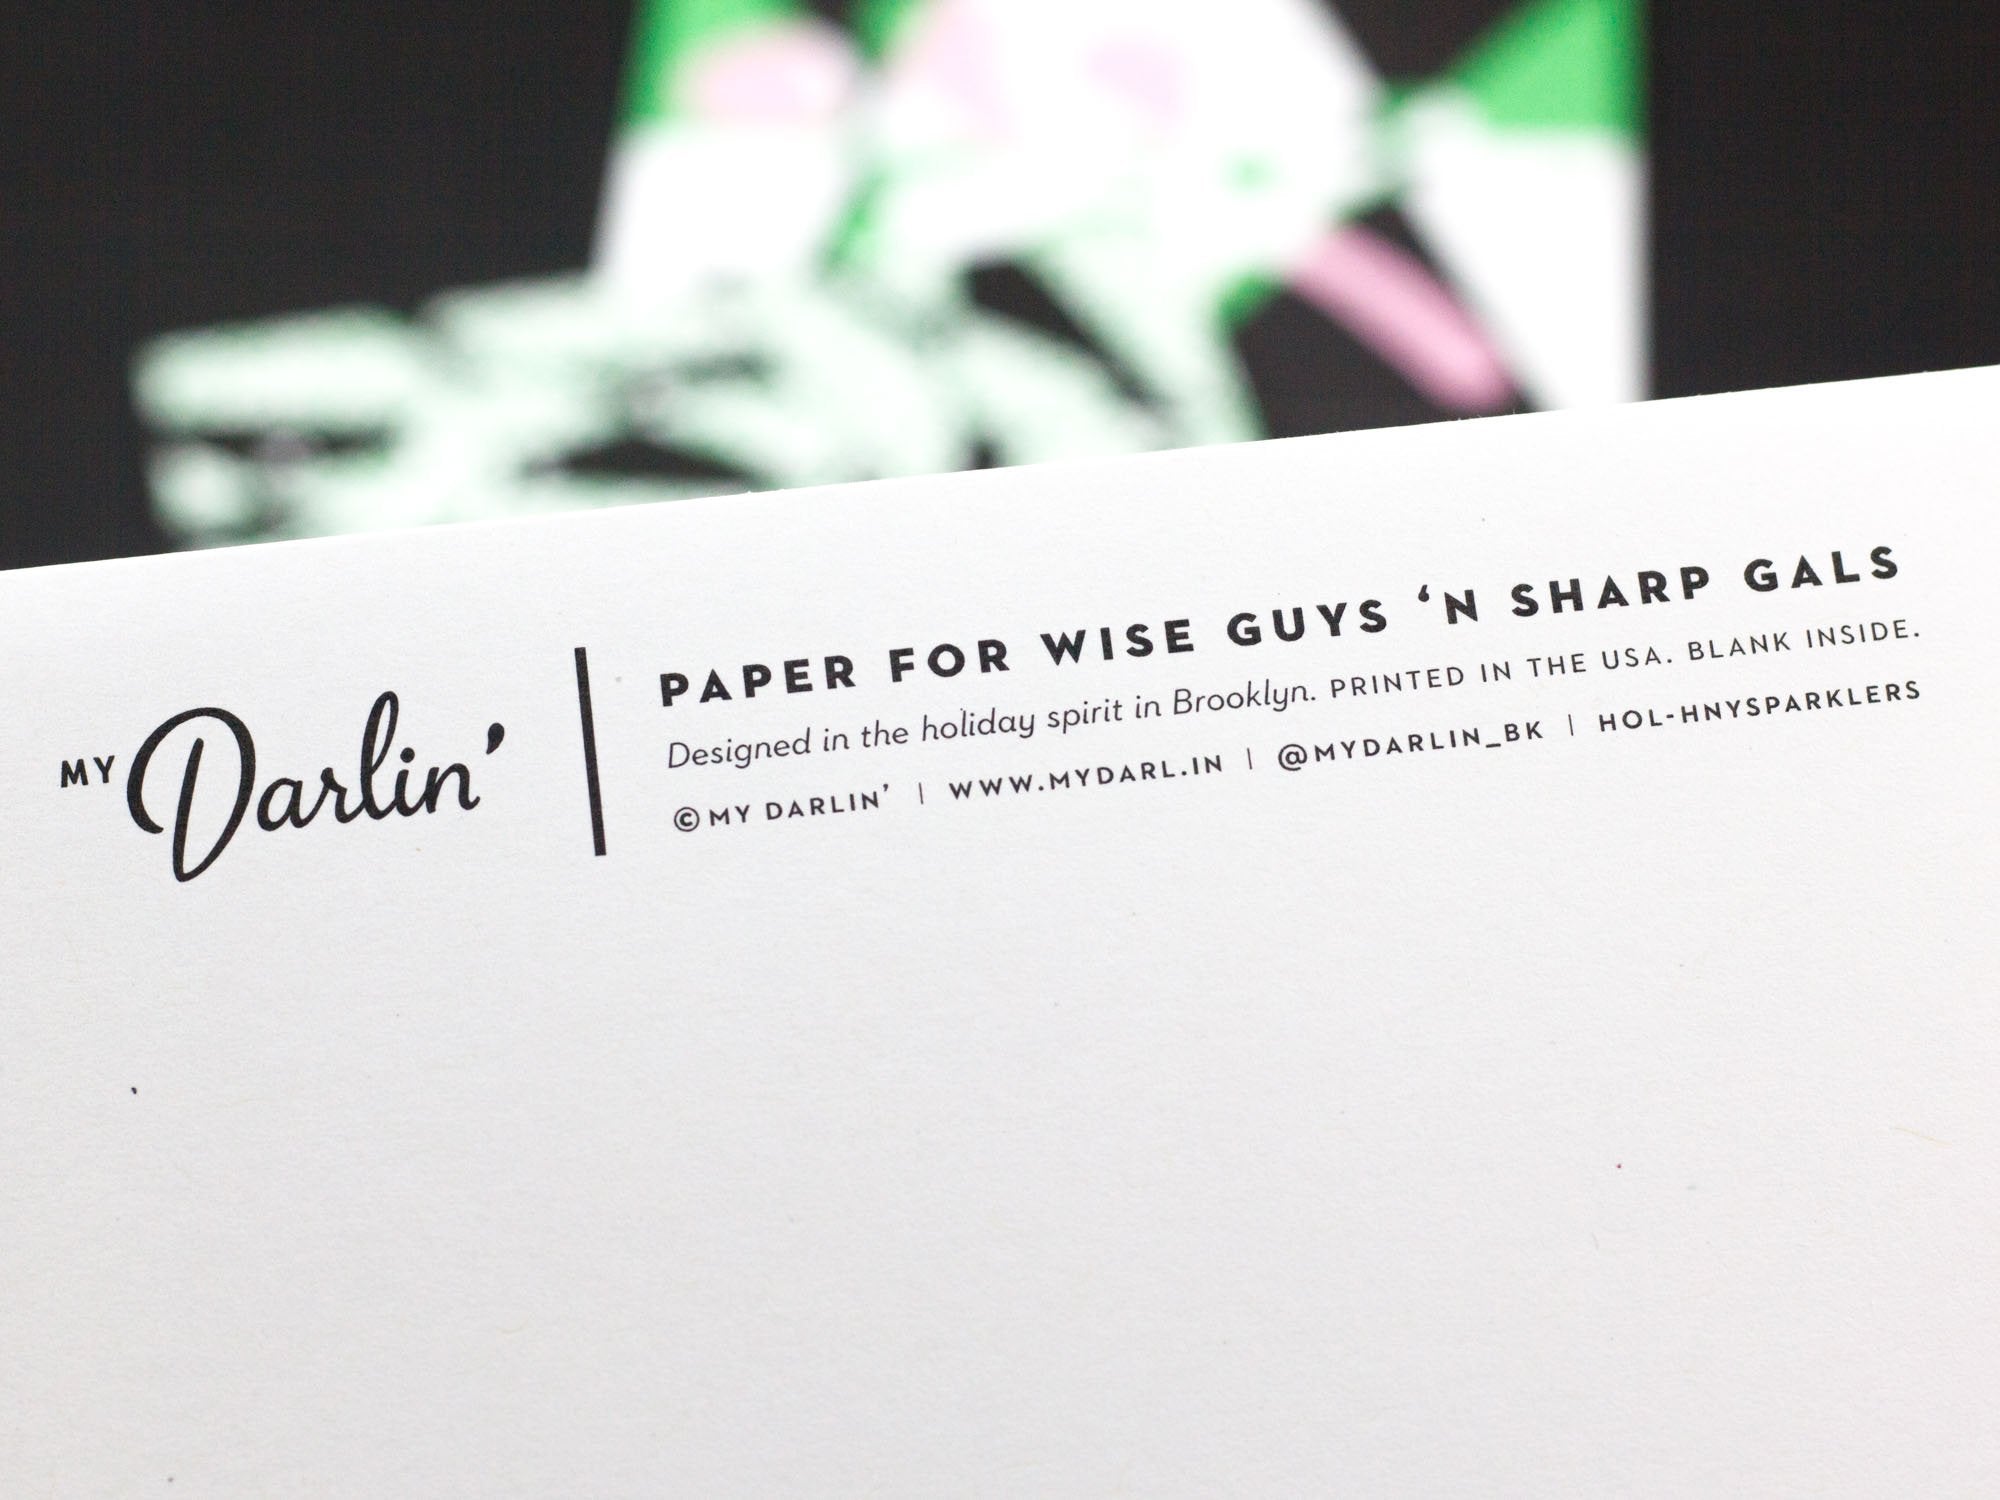 Secret messages on the back of My Darlin' holiday cards. Designed in the holiday spirit by @mydarlin_bk